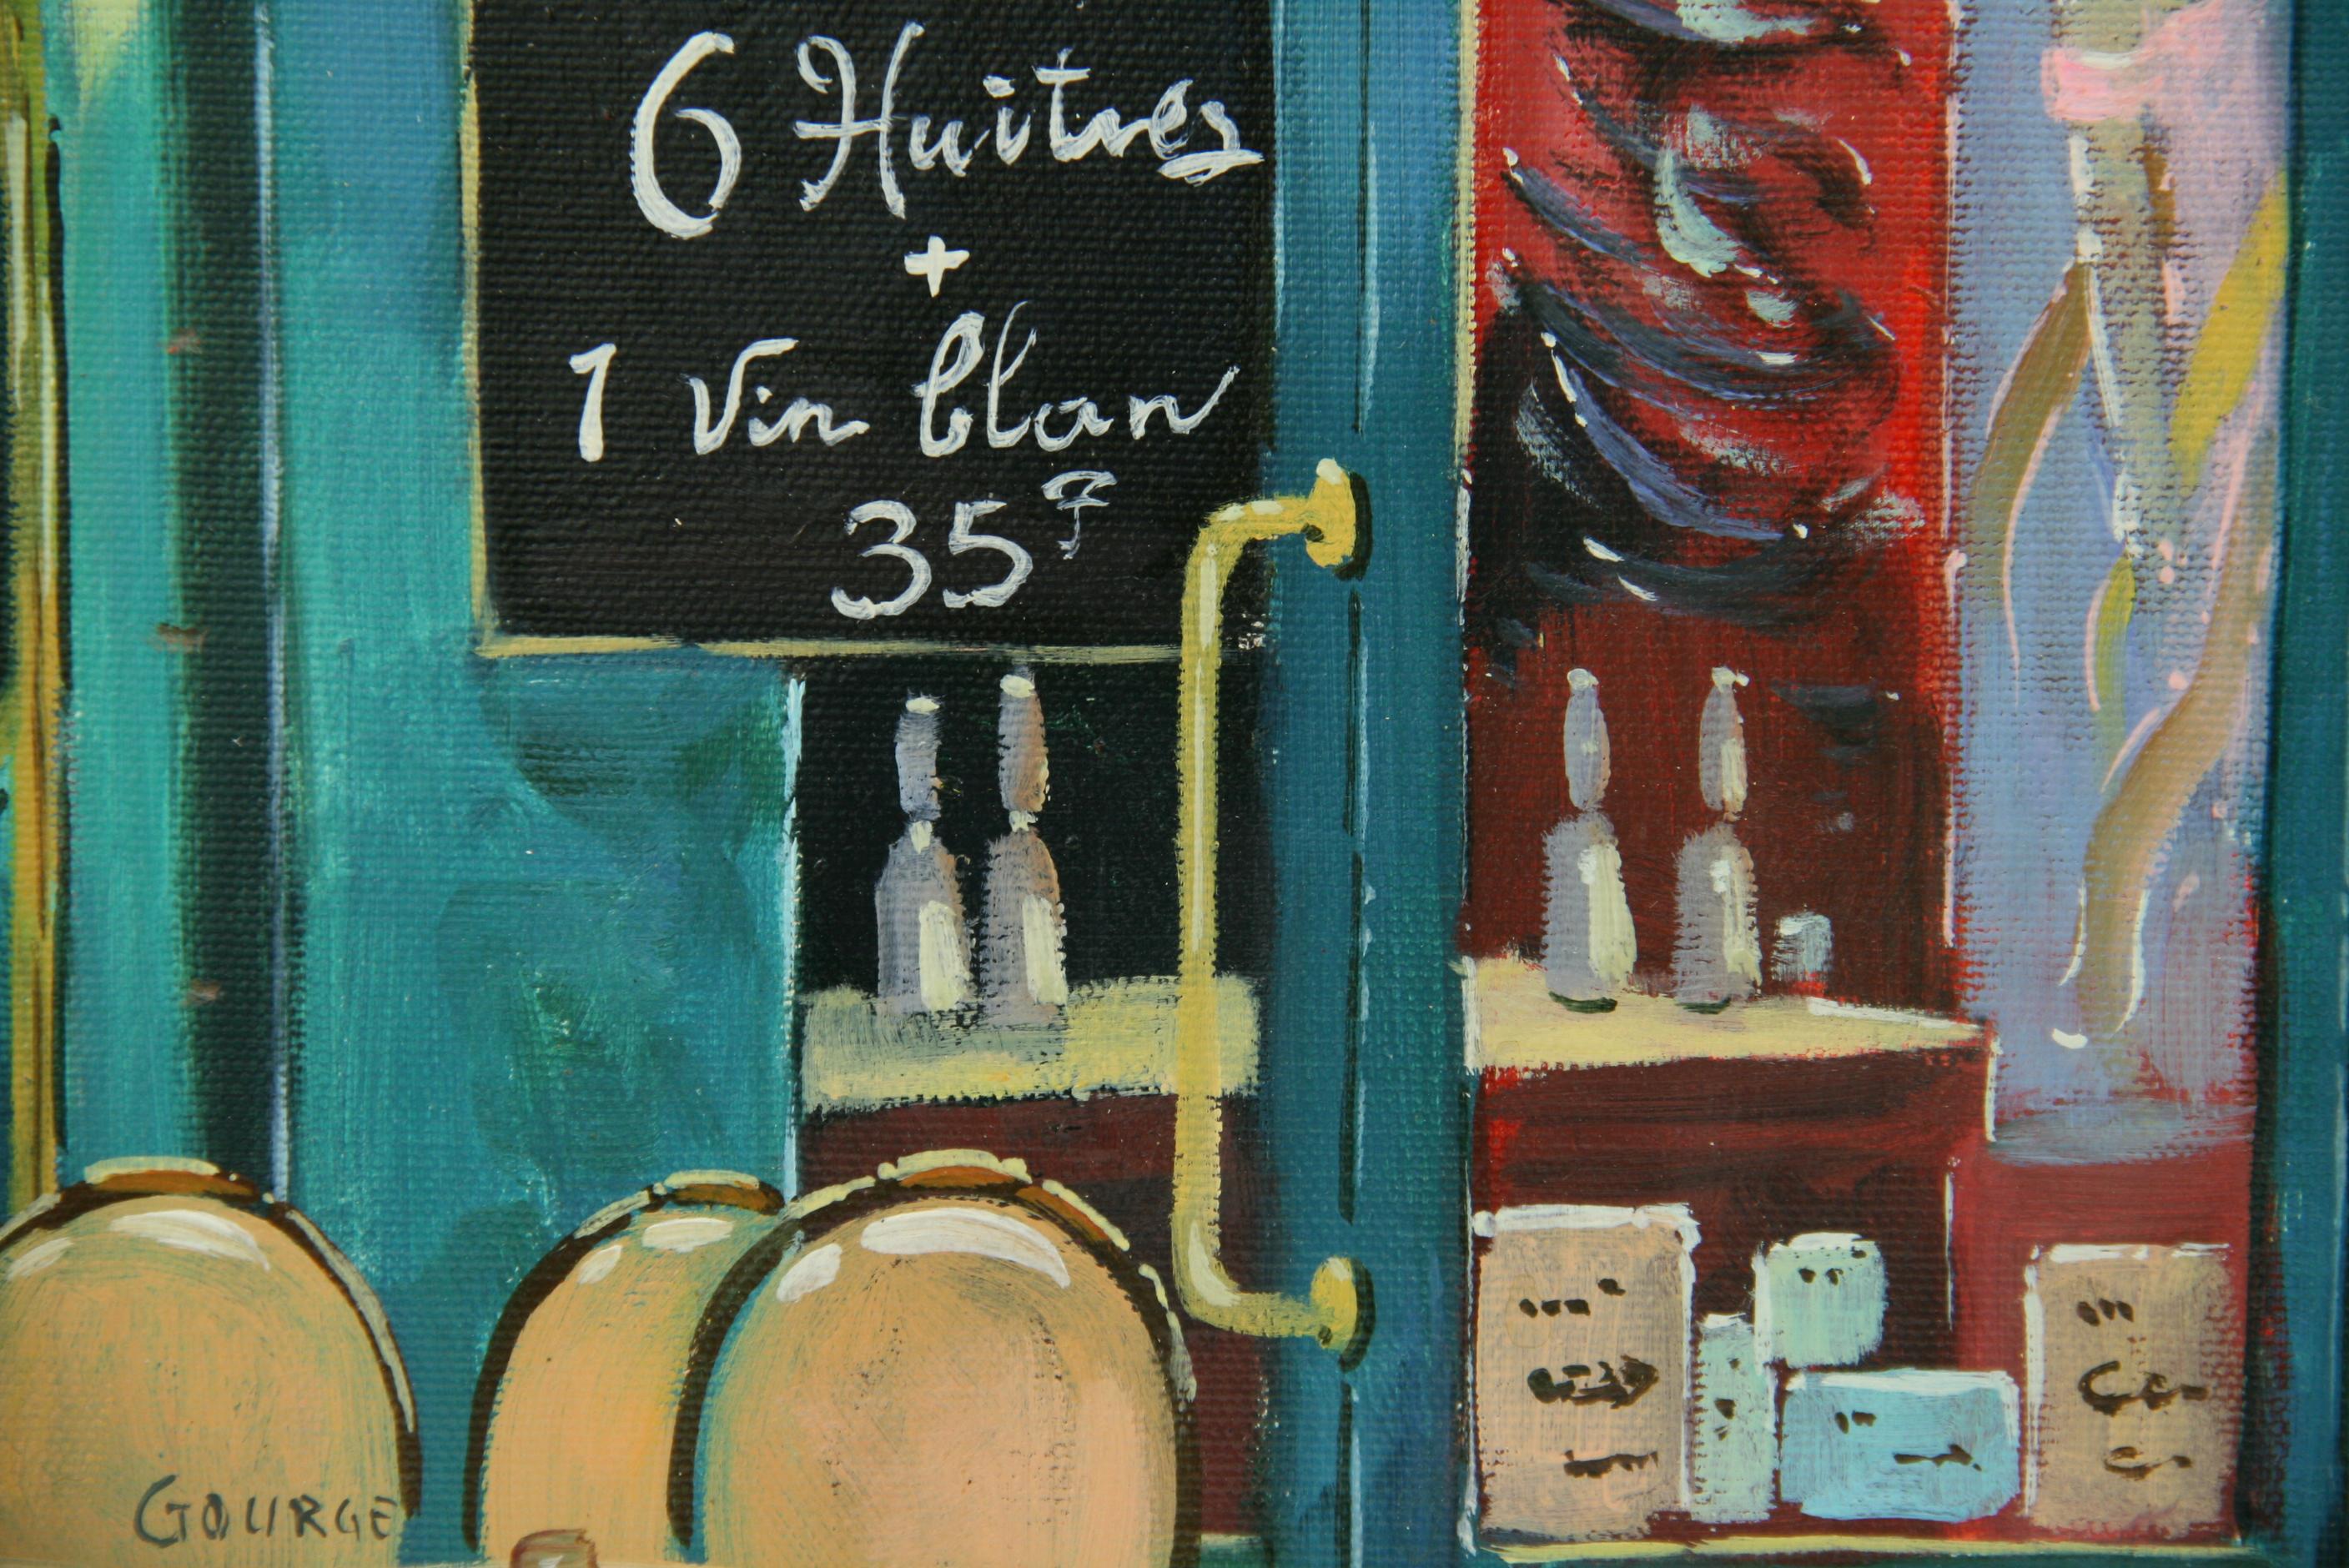 Lunch Time at The French Bistro #1 - Painting by Gourge